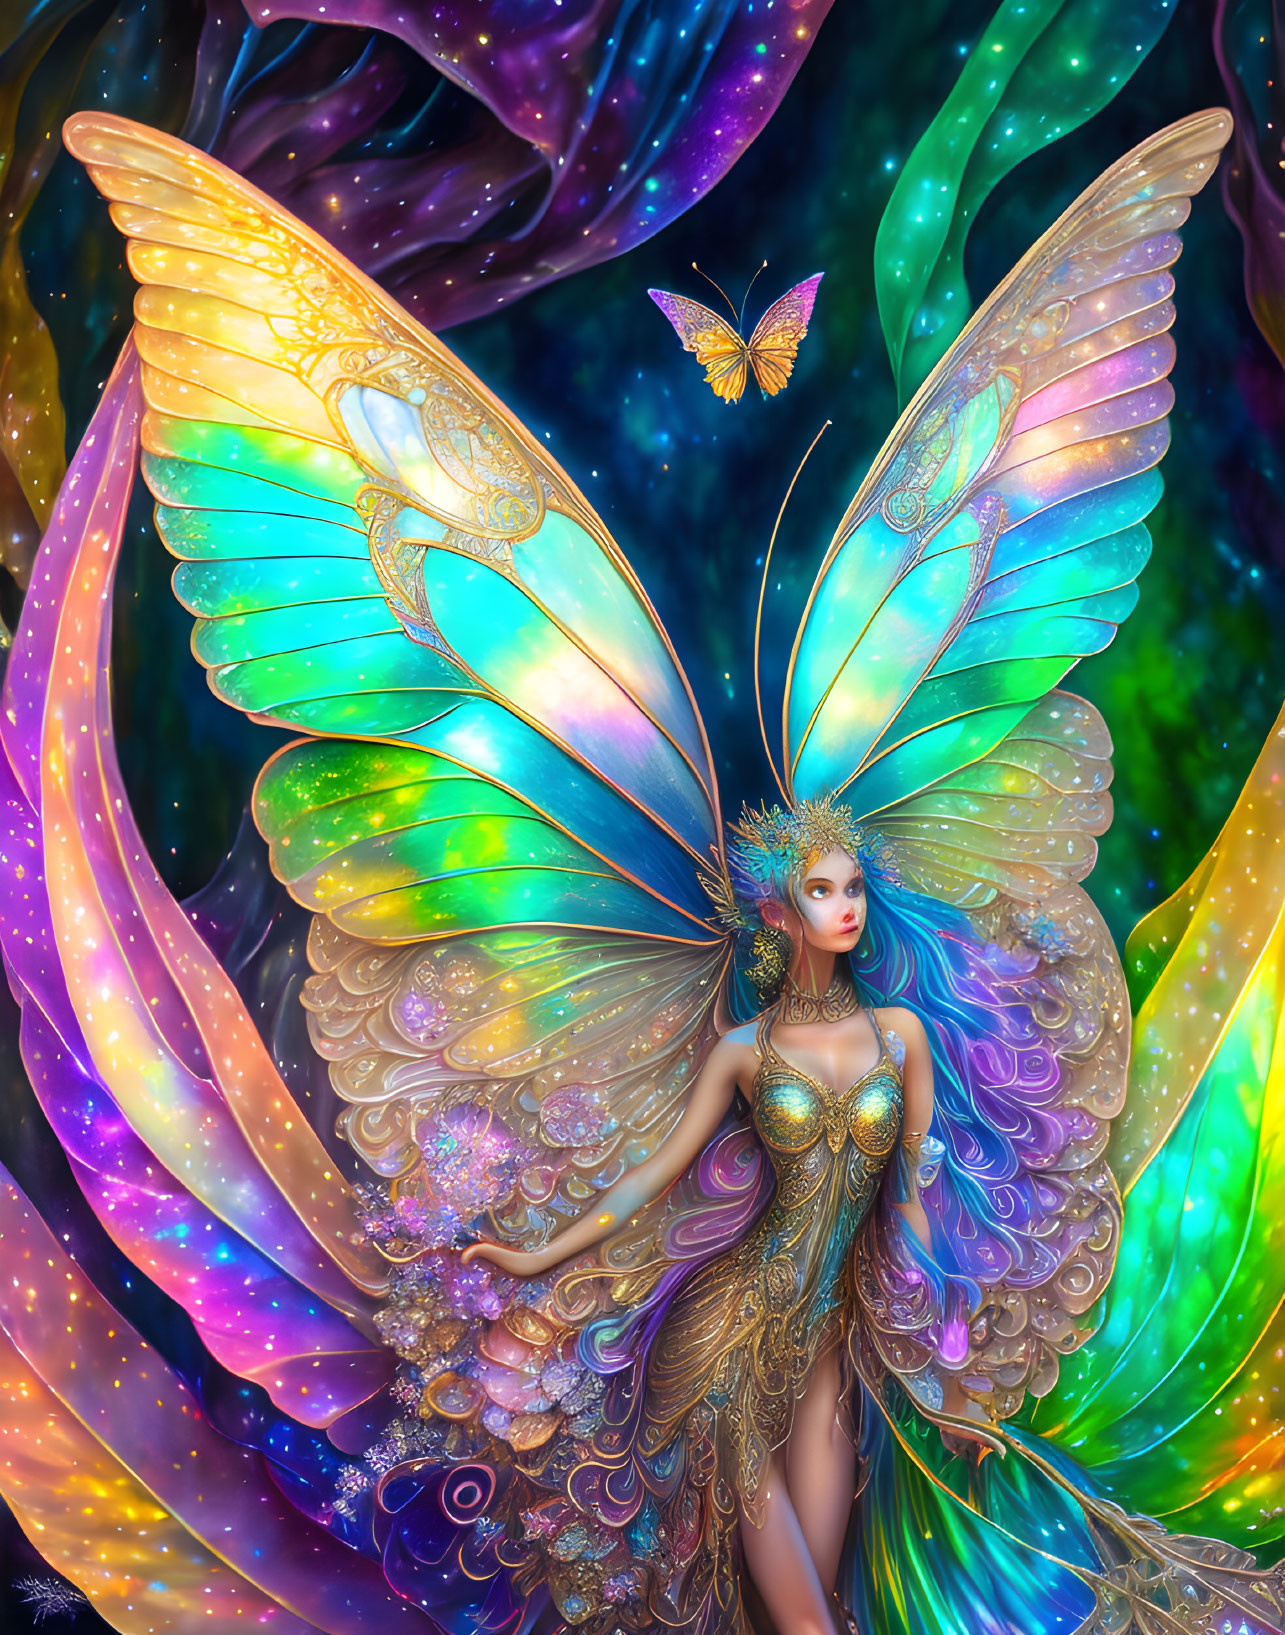 Fantasy illustration: Woman with iridescent butterfly wings and cosmic colors.